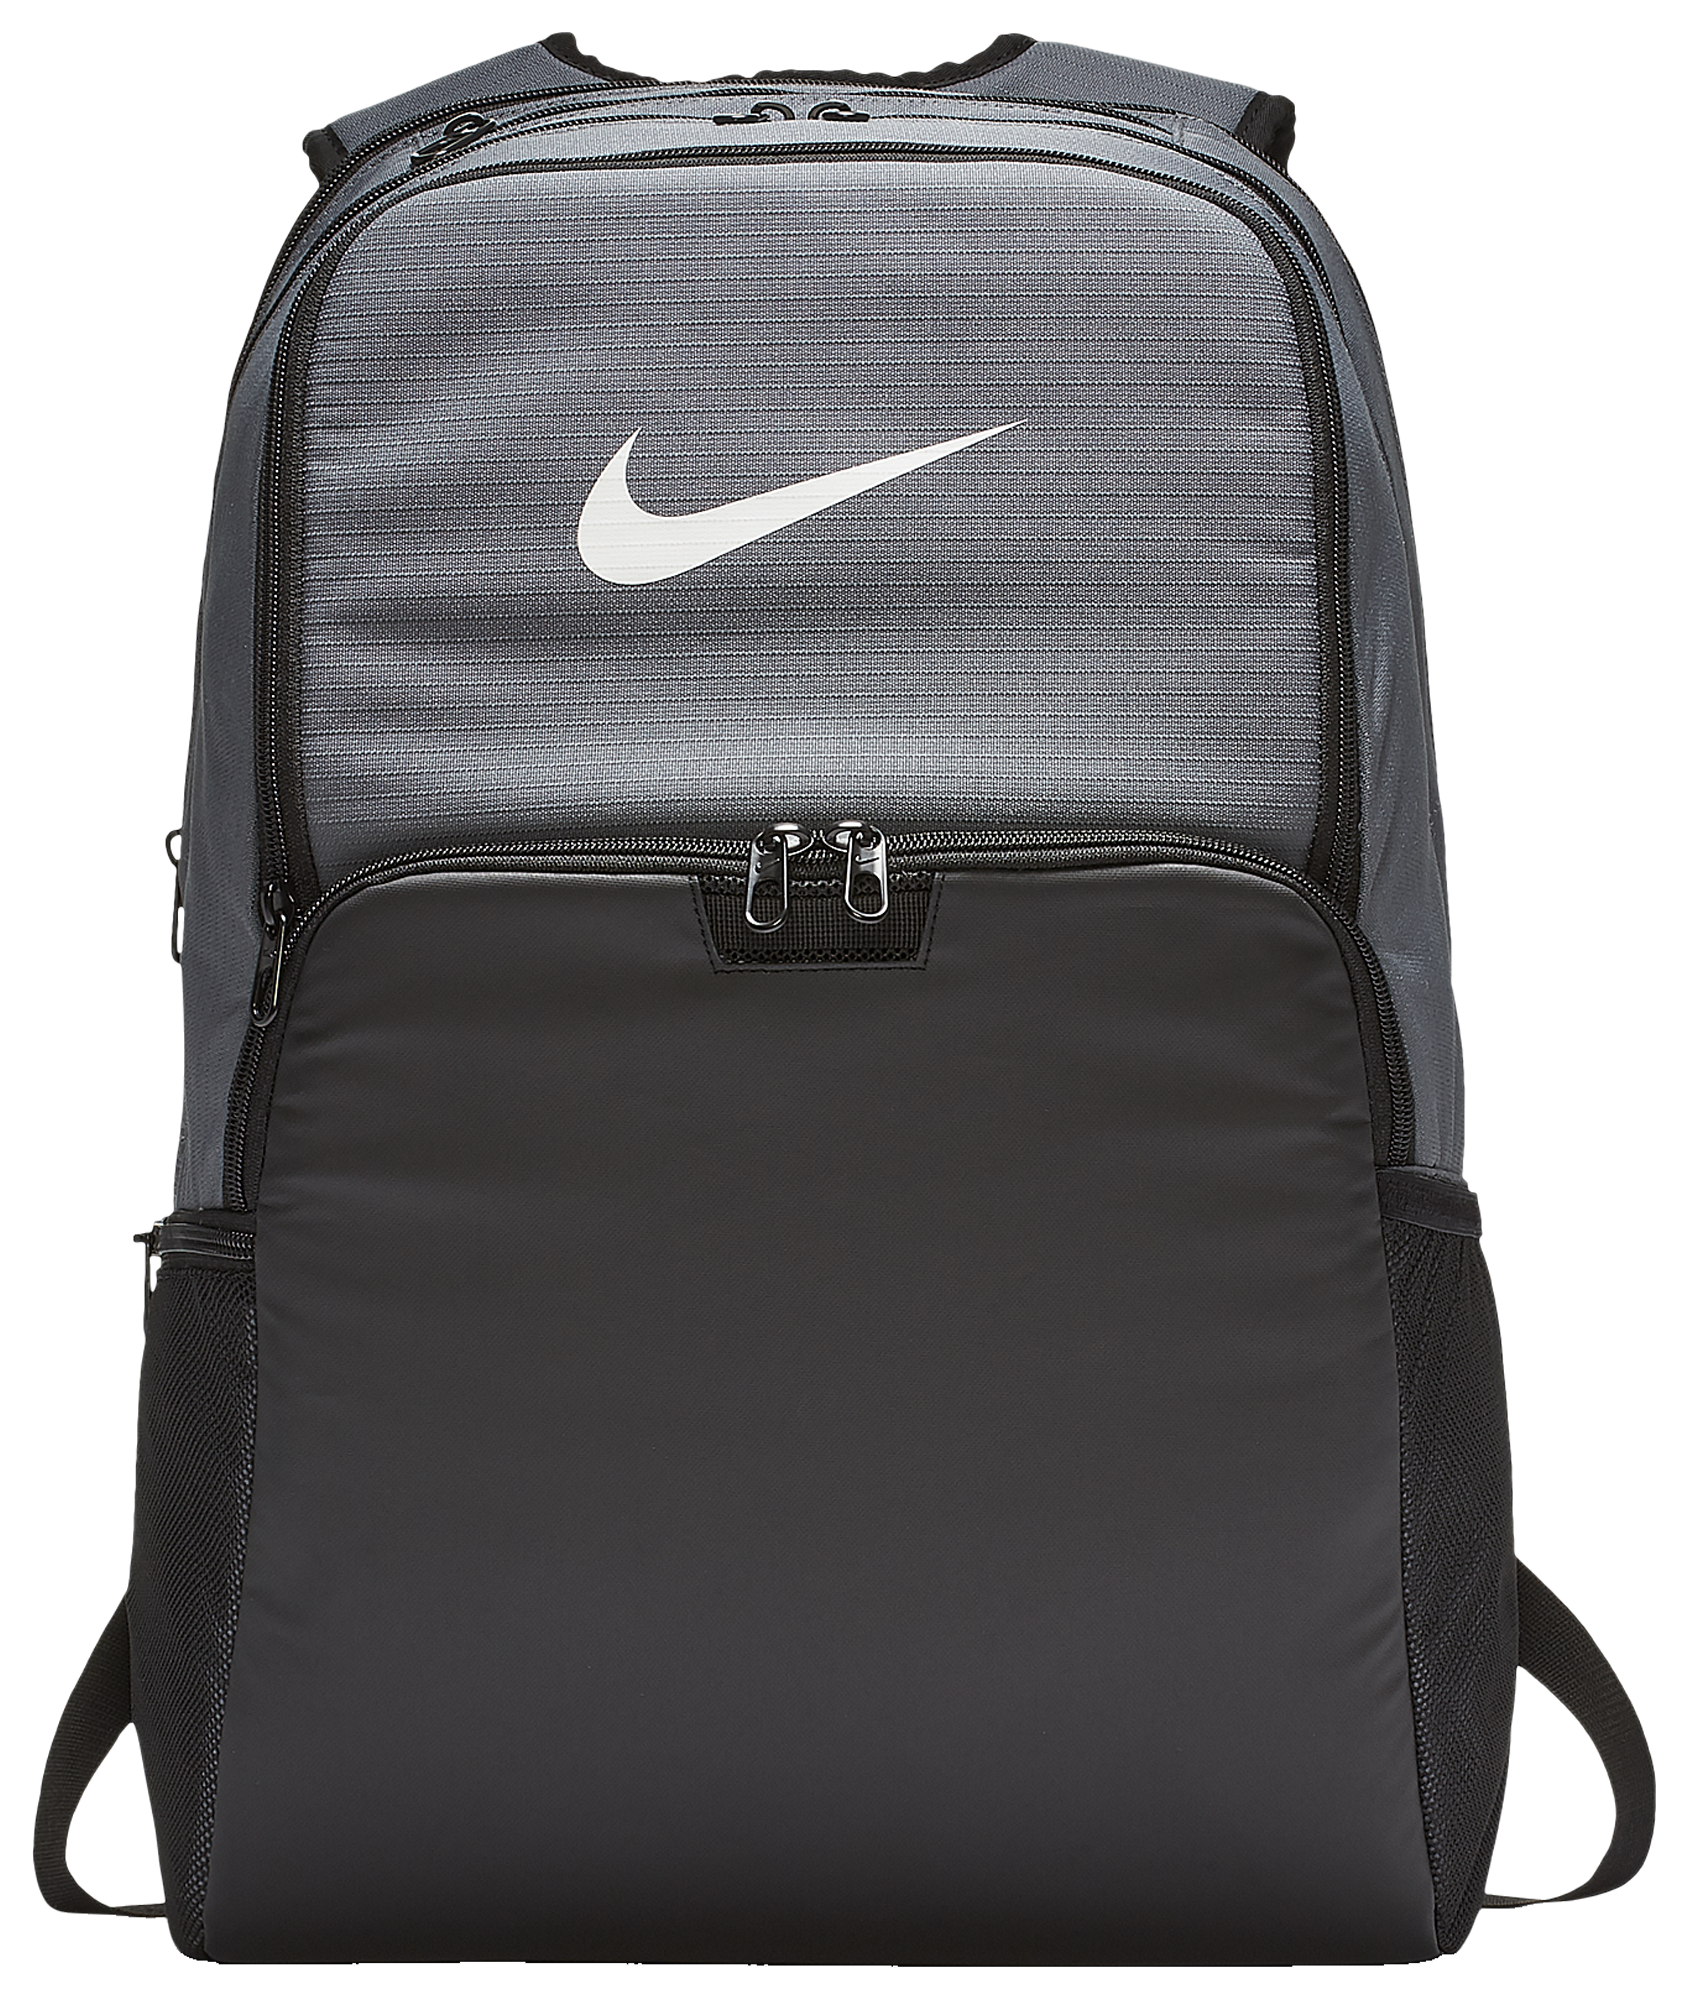 nike reign backpack price